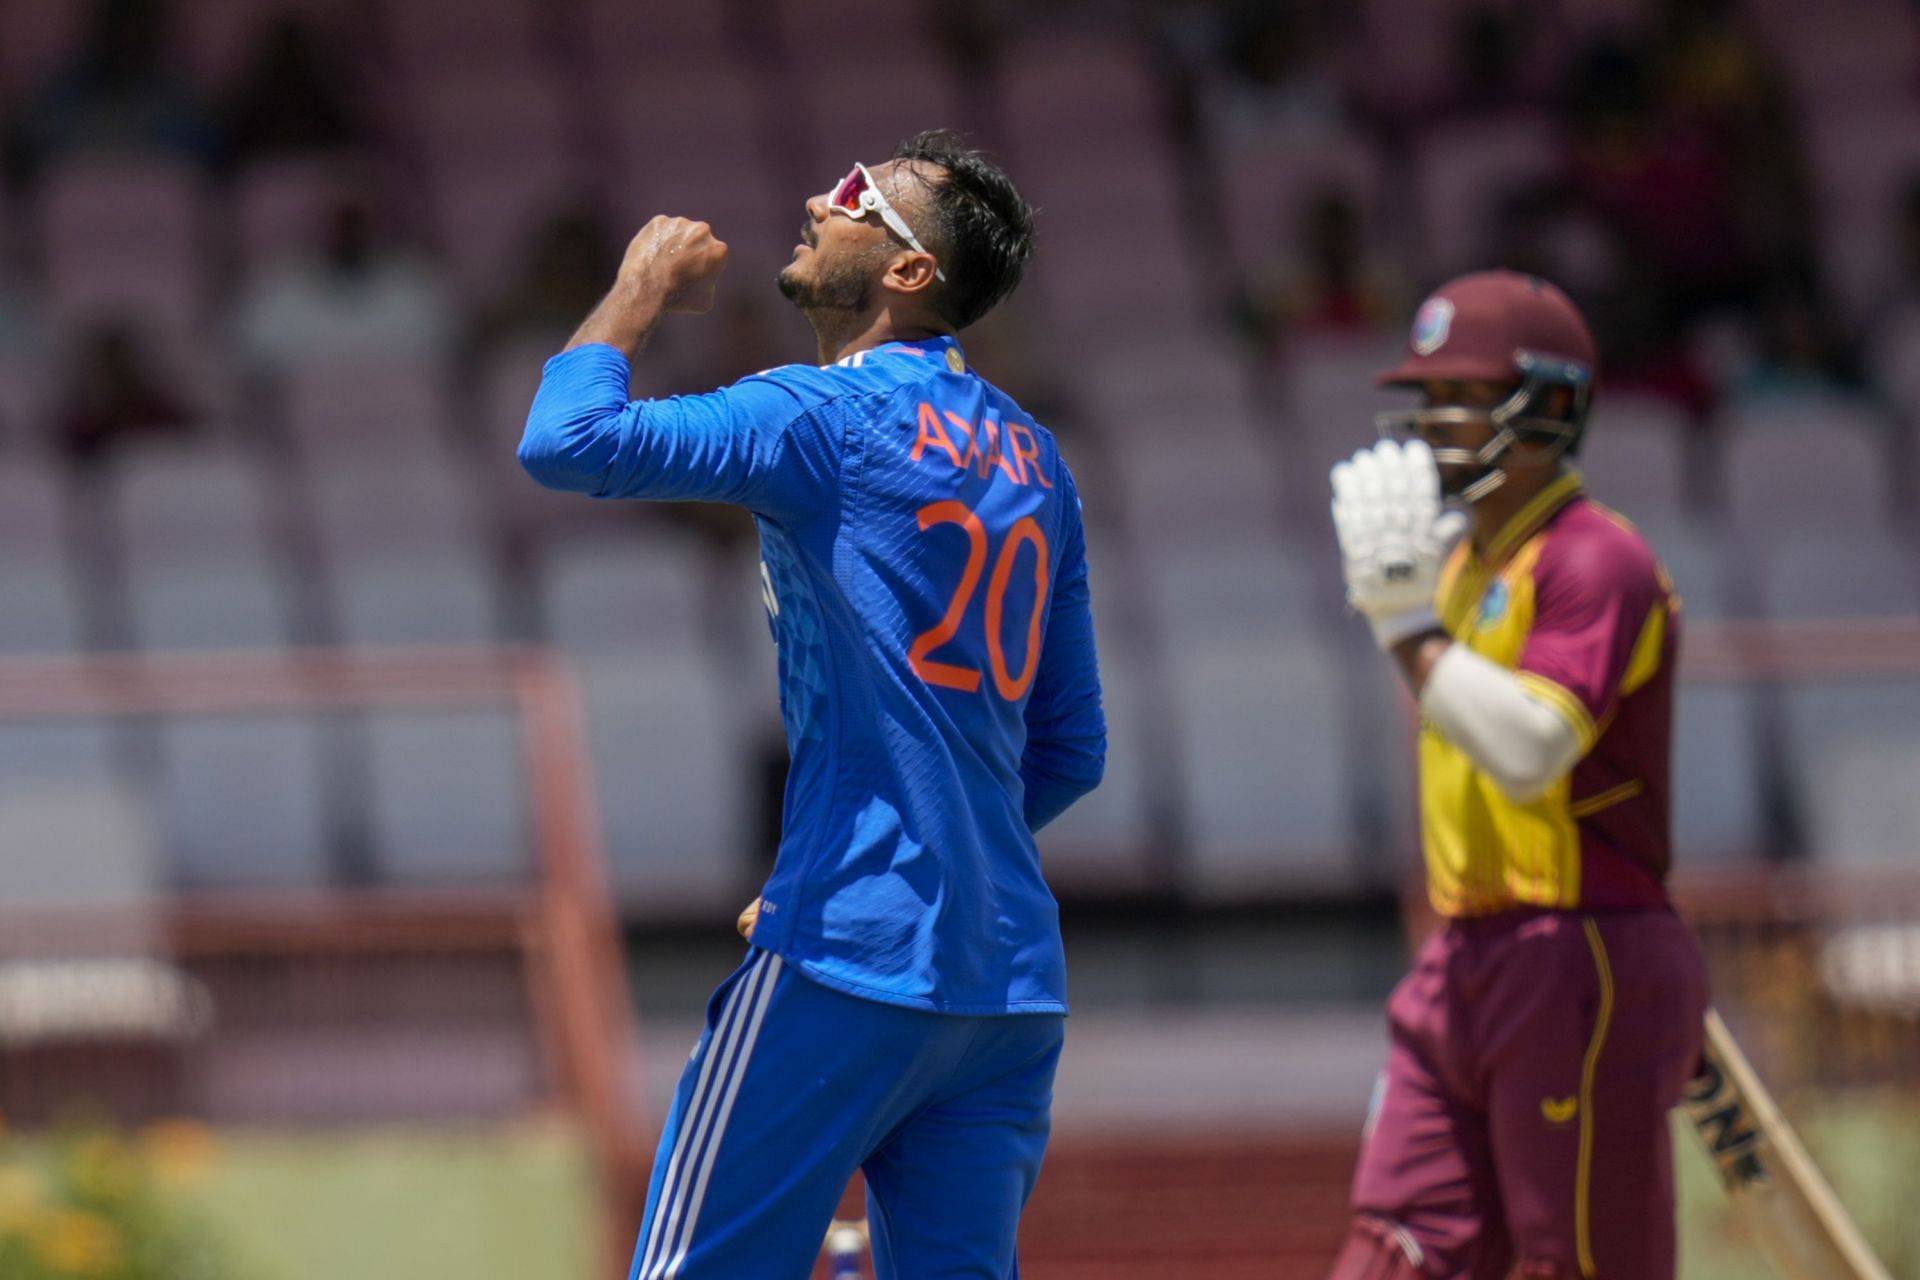 Axar Patel celebrates a wicket during the T20I series in West Indies (Pic: AP Photo/Ramon Espinosa)